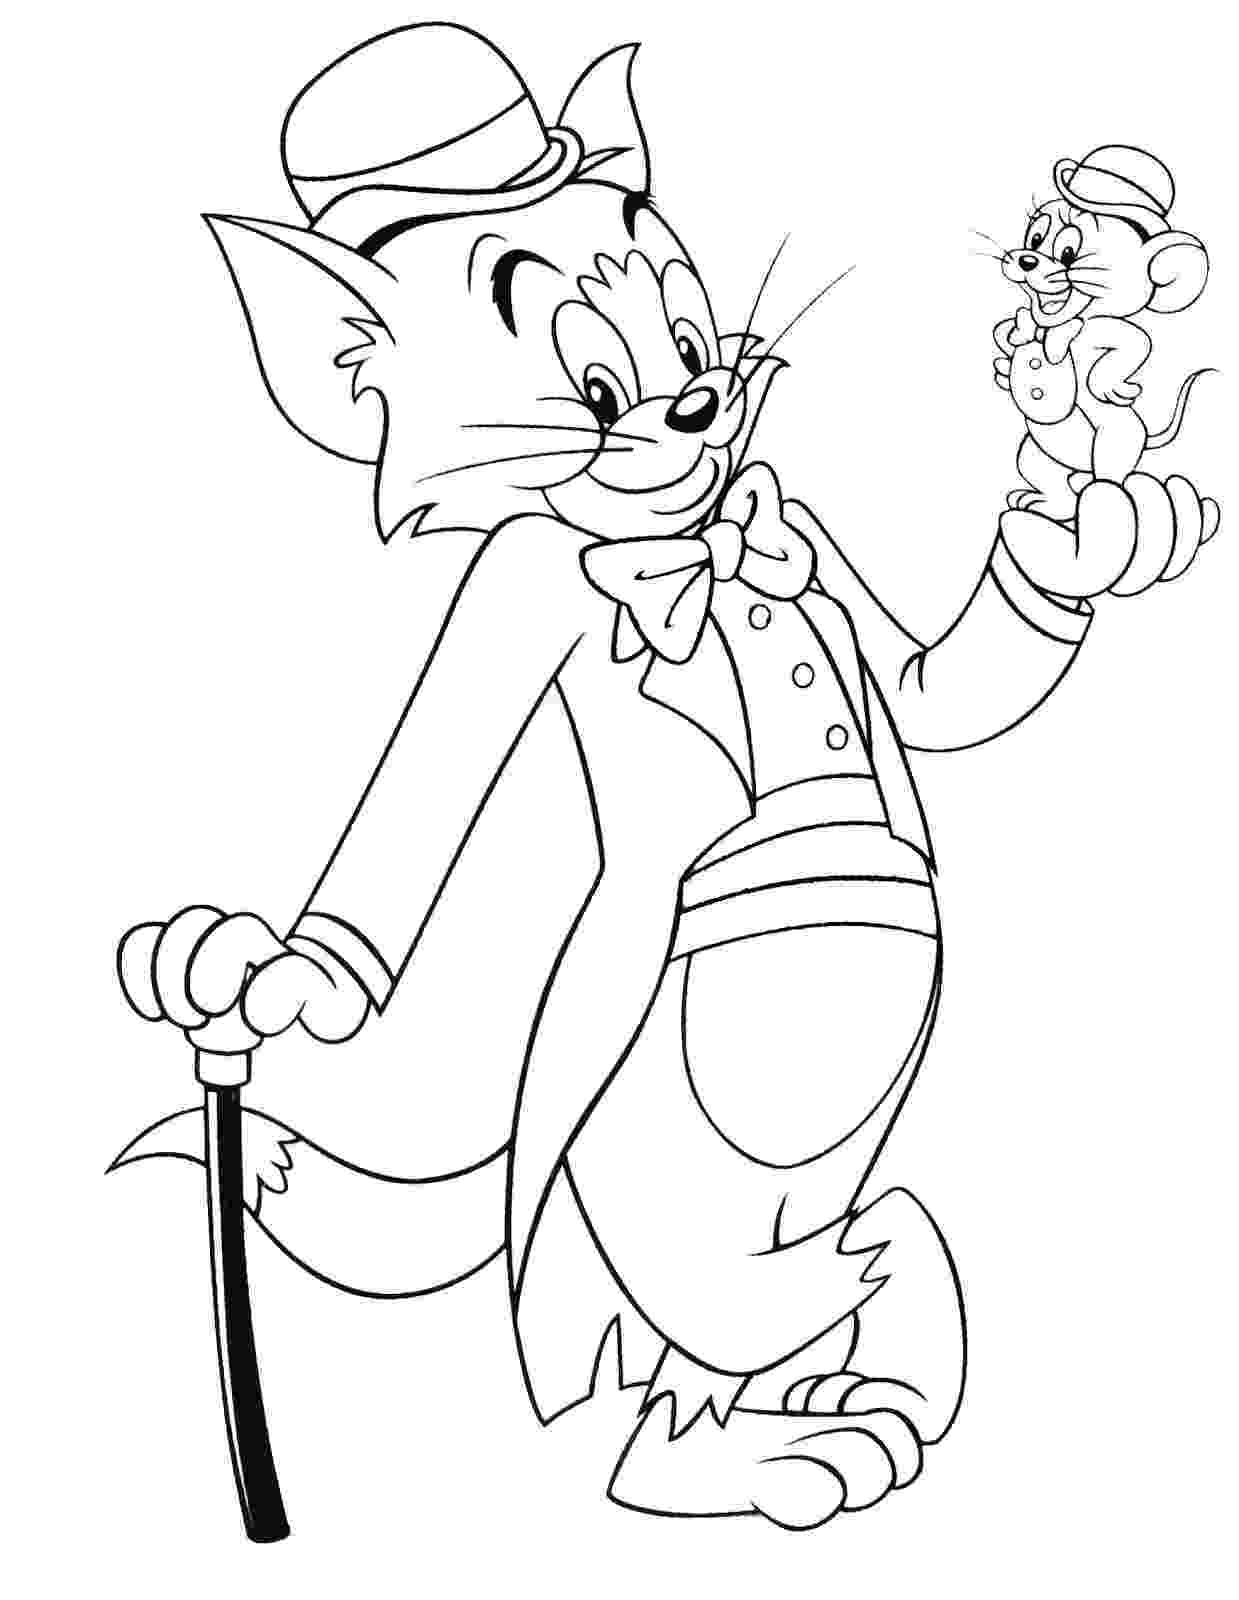 tom and jerry coloring page august 2012 minister coloring tom and jerry coloring page 